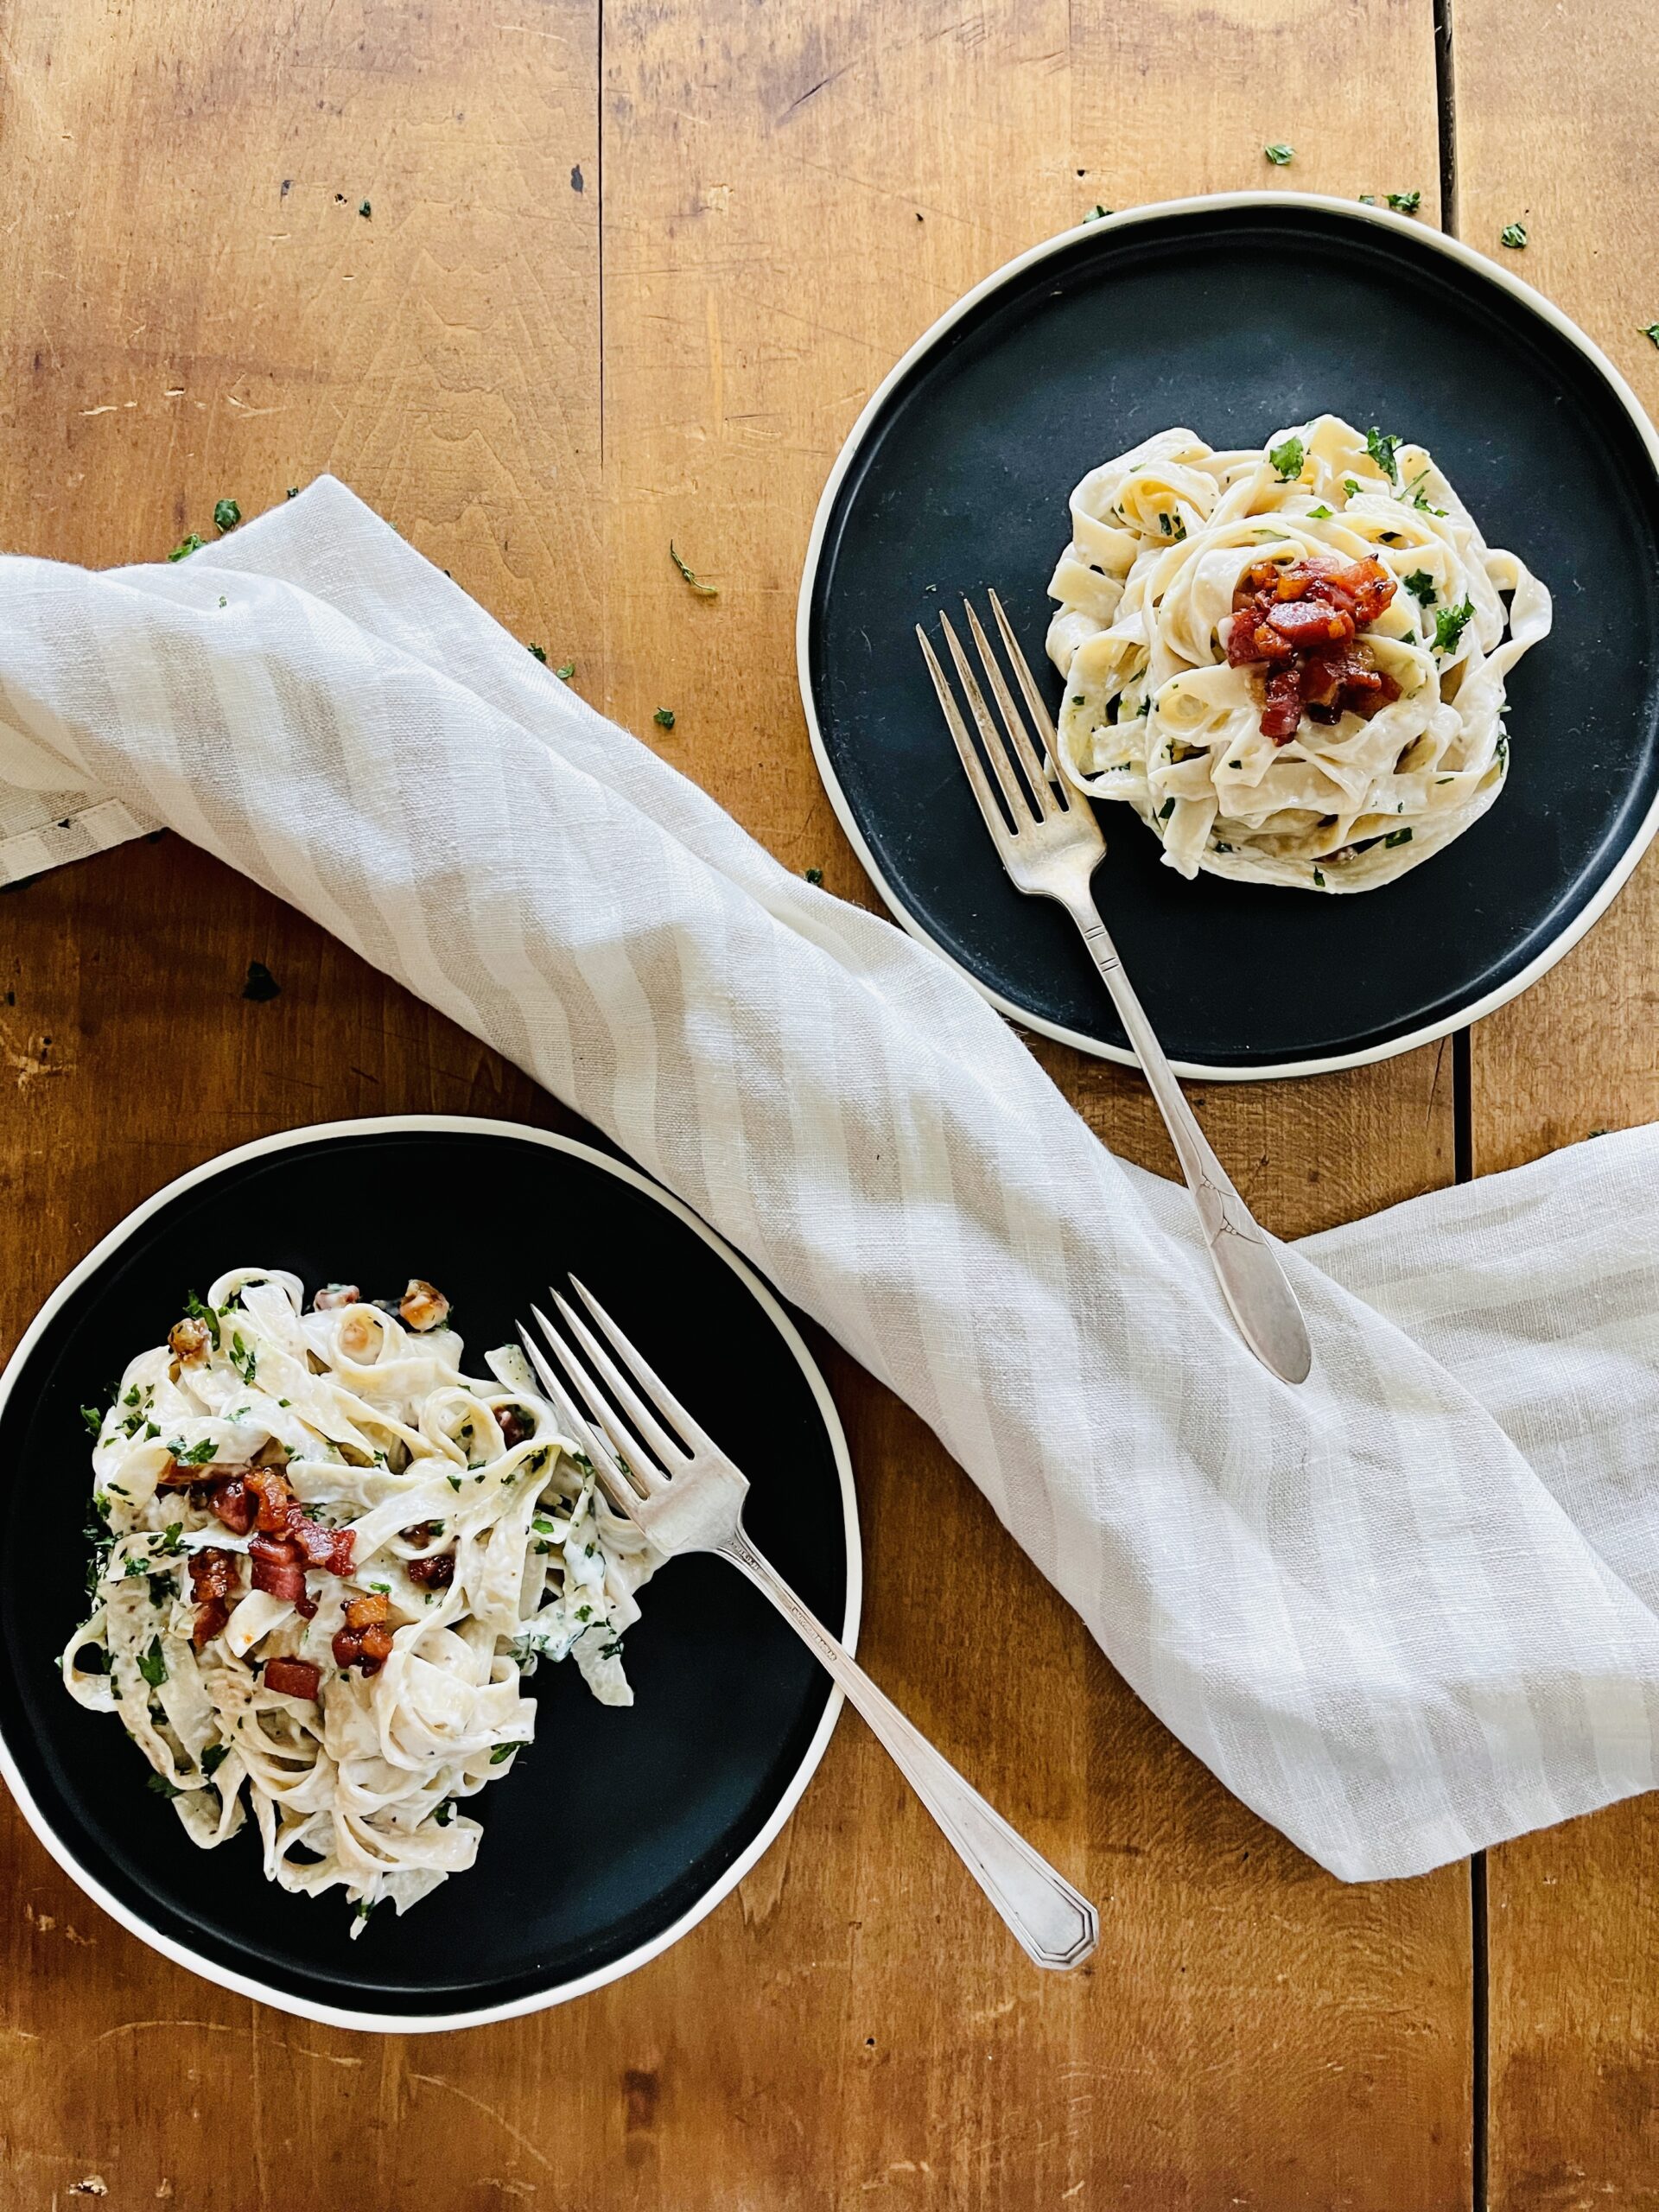 ARE EGG NOODLES GLUTEN-FREE?